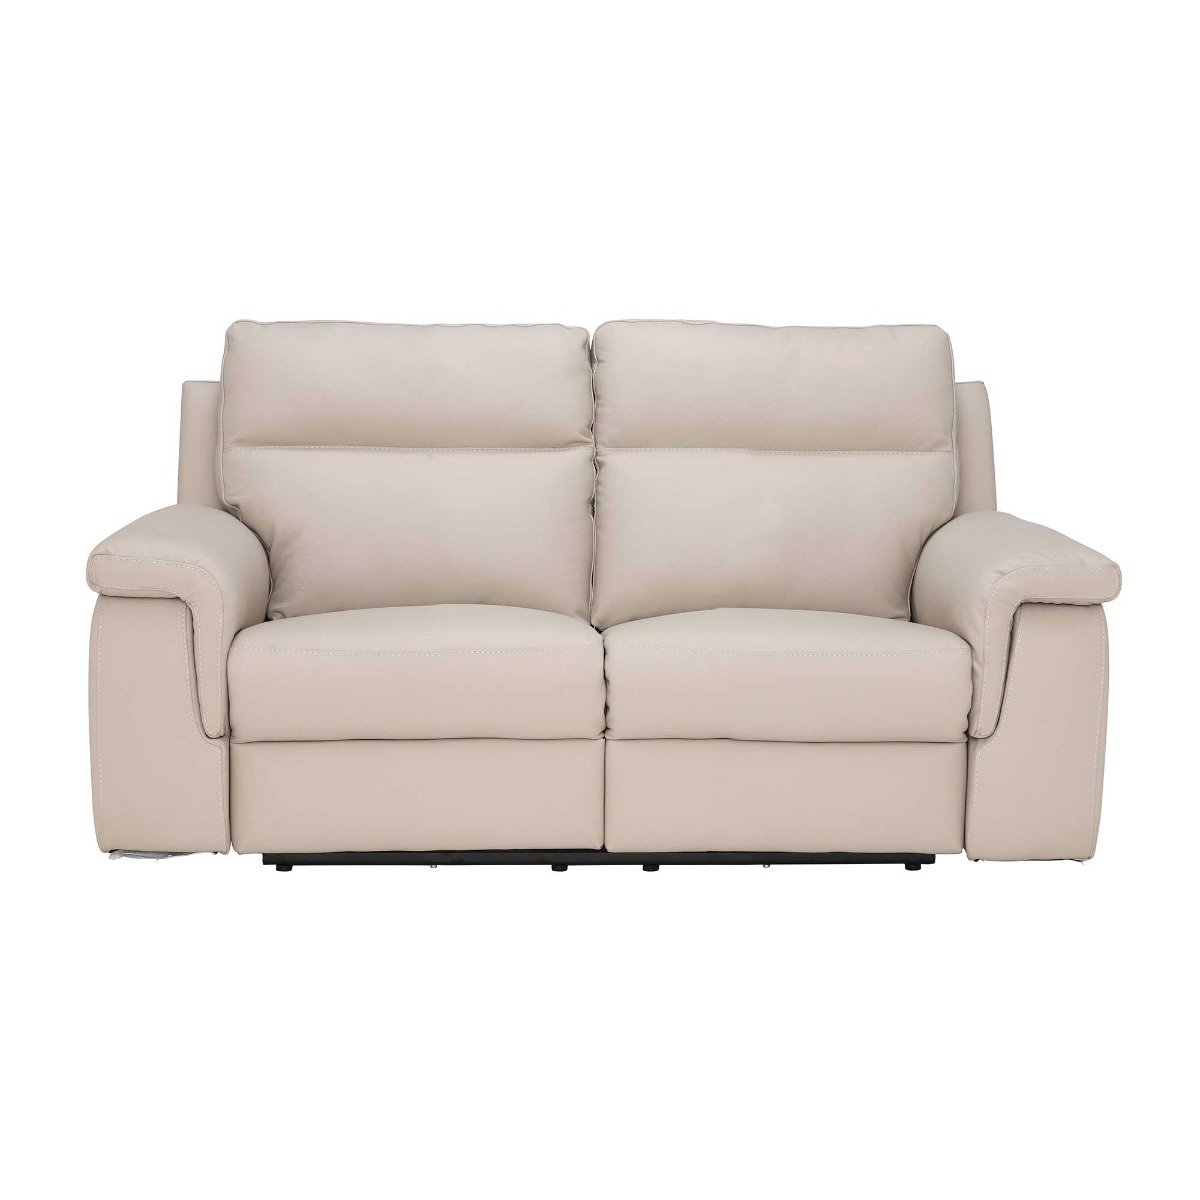 Fulton 2 Seater Sofa With 2 Electric Recliners, Neutral | Barker & Stonehouse